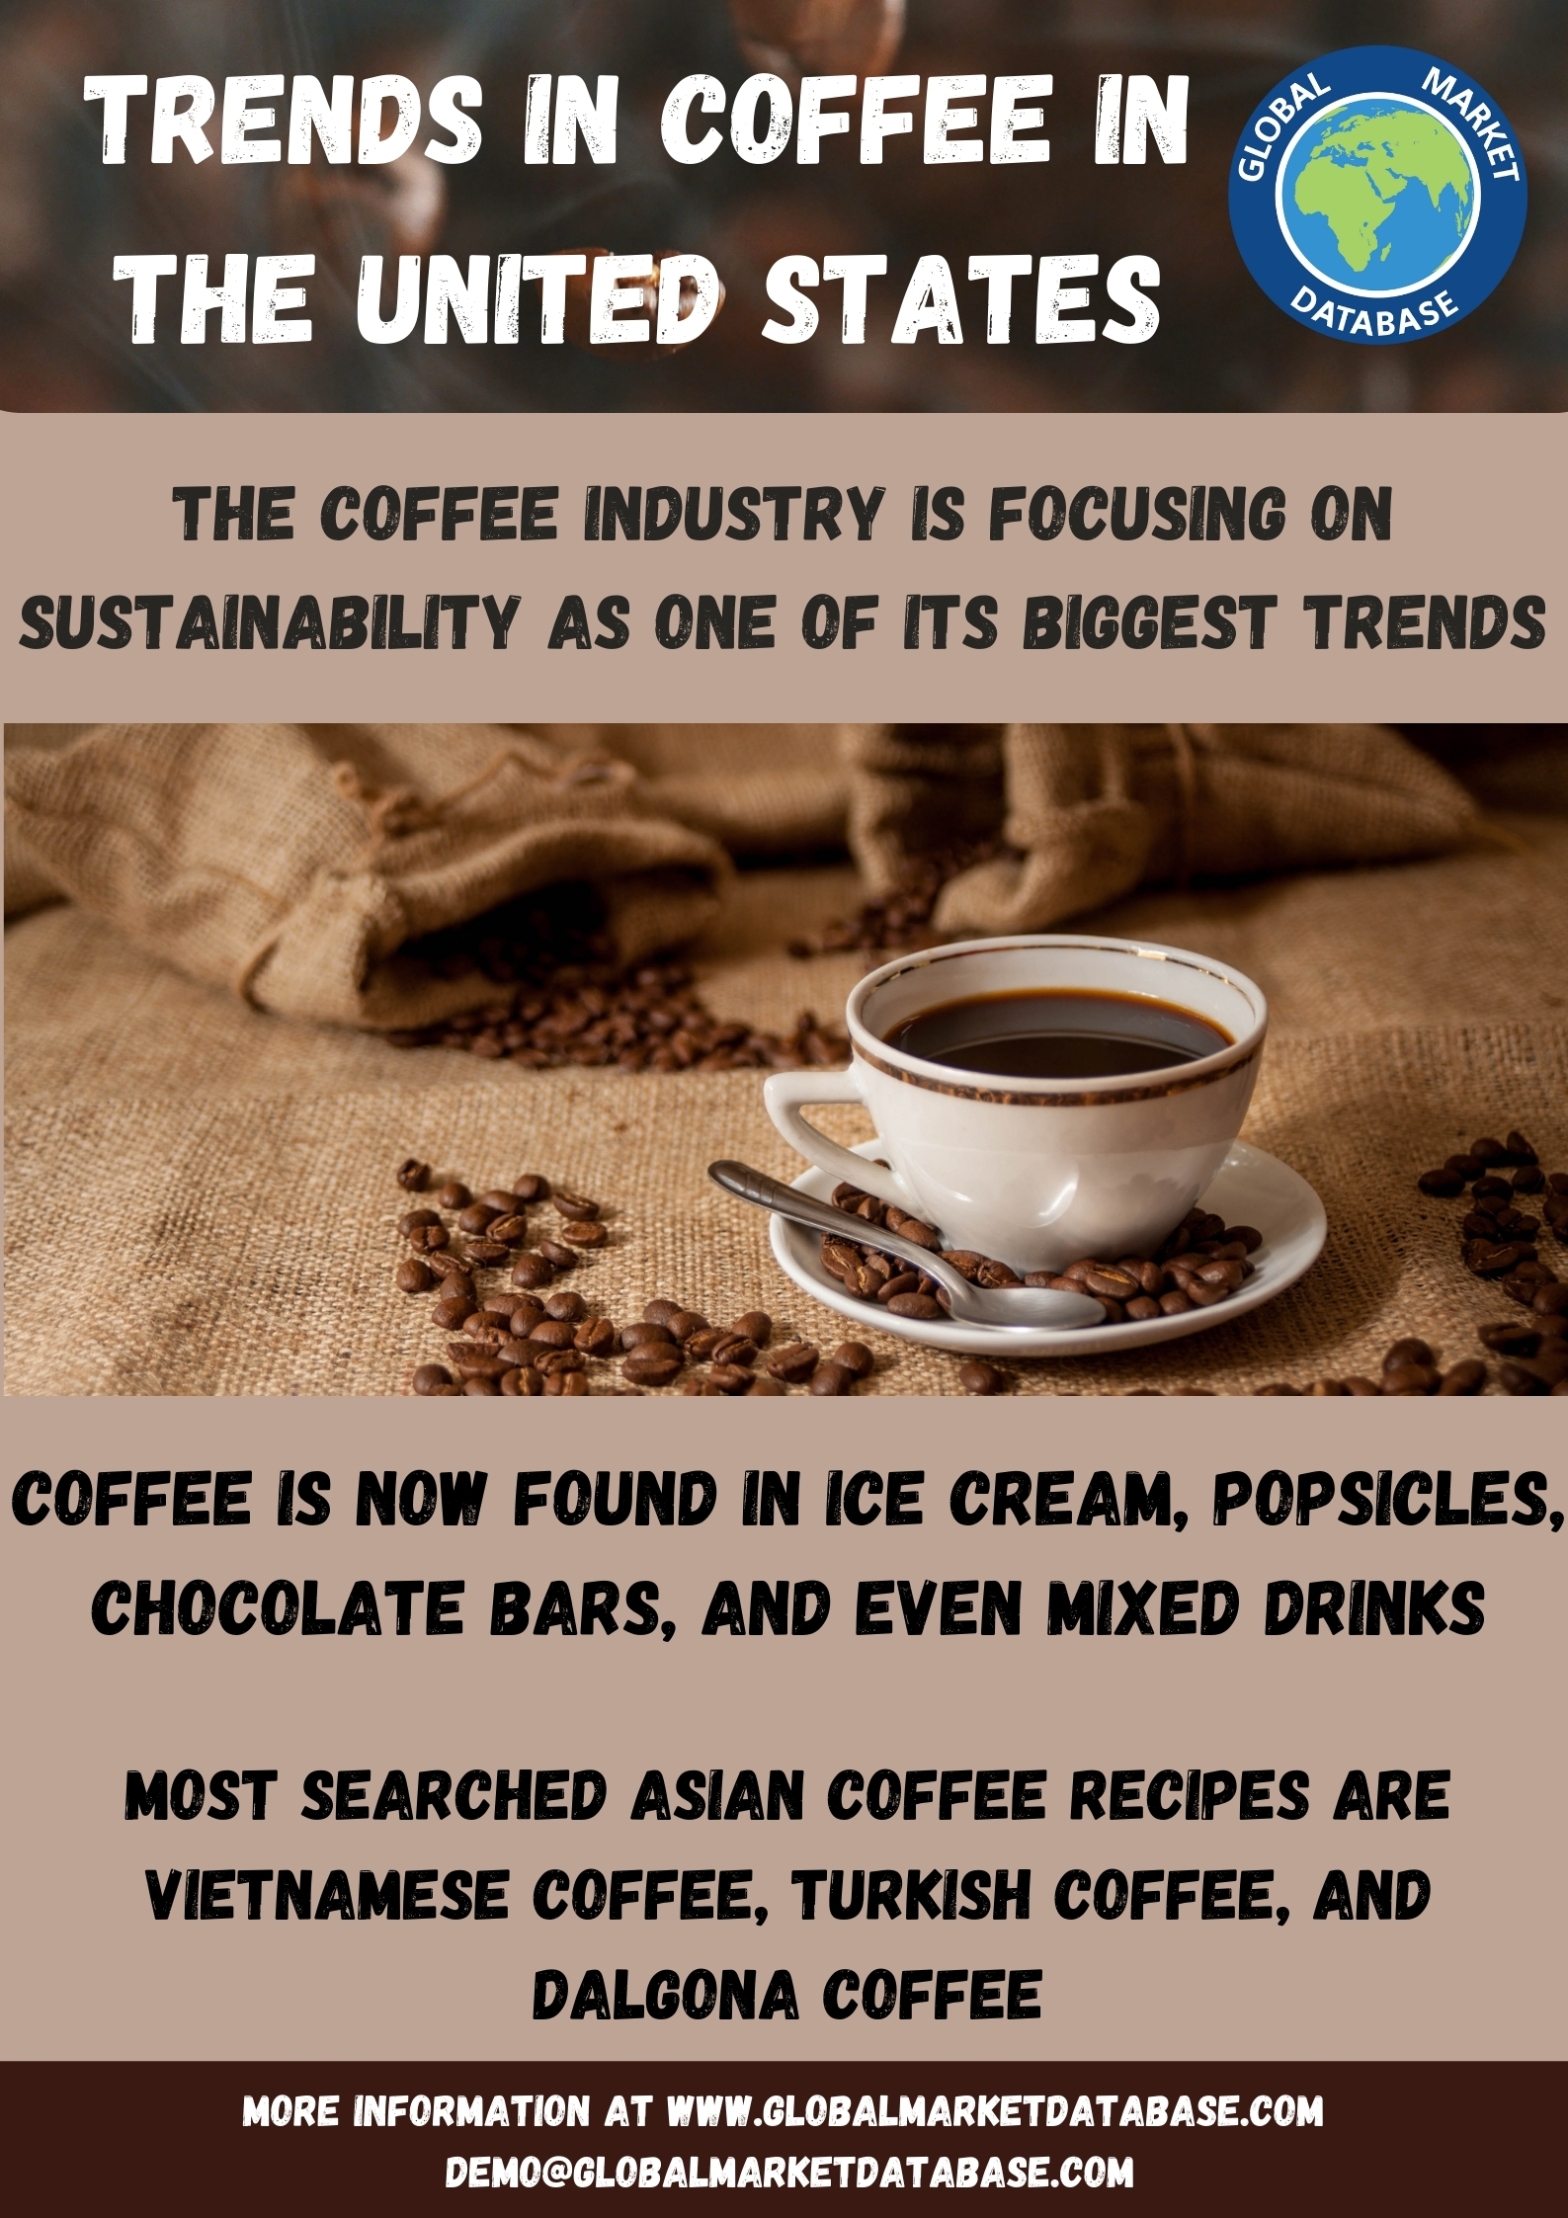 Trends in Coffee